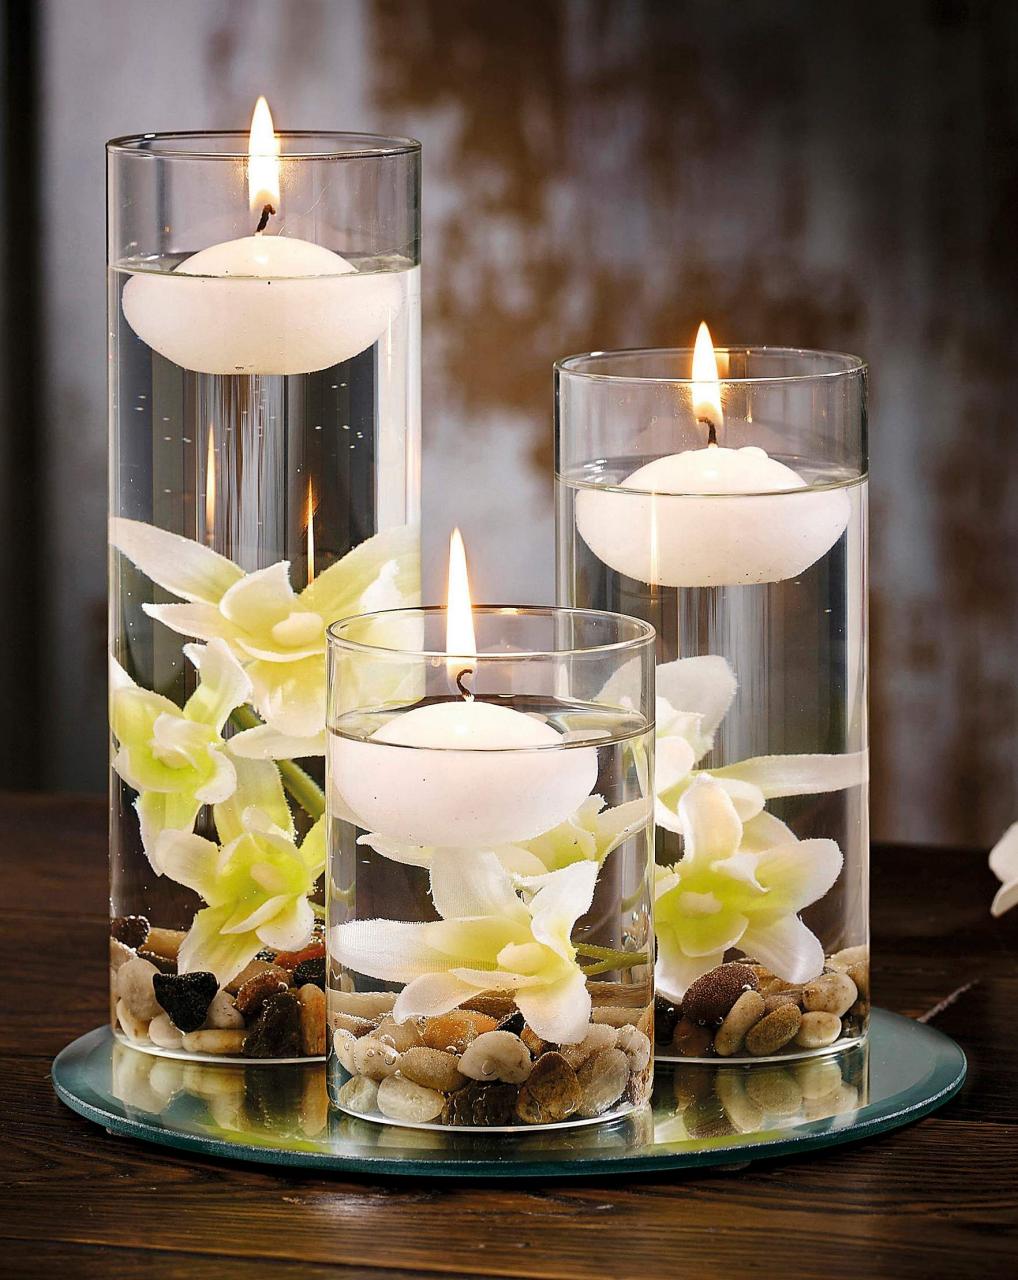 Floating Candle Set House of Bath Floating candle centerpieces